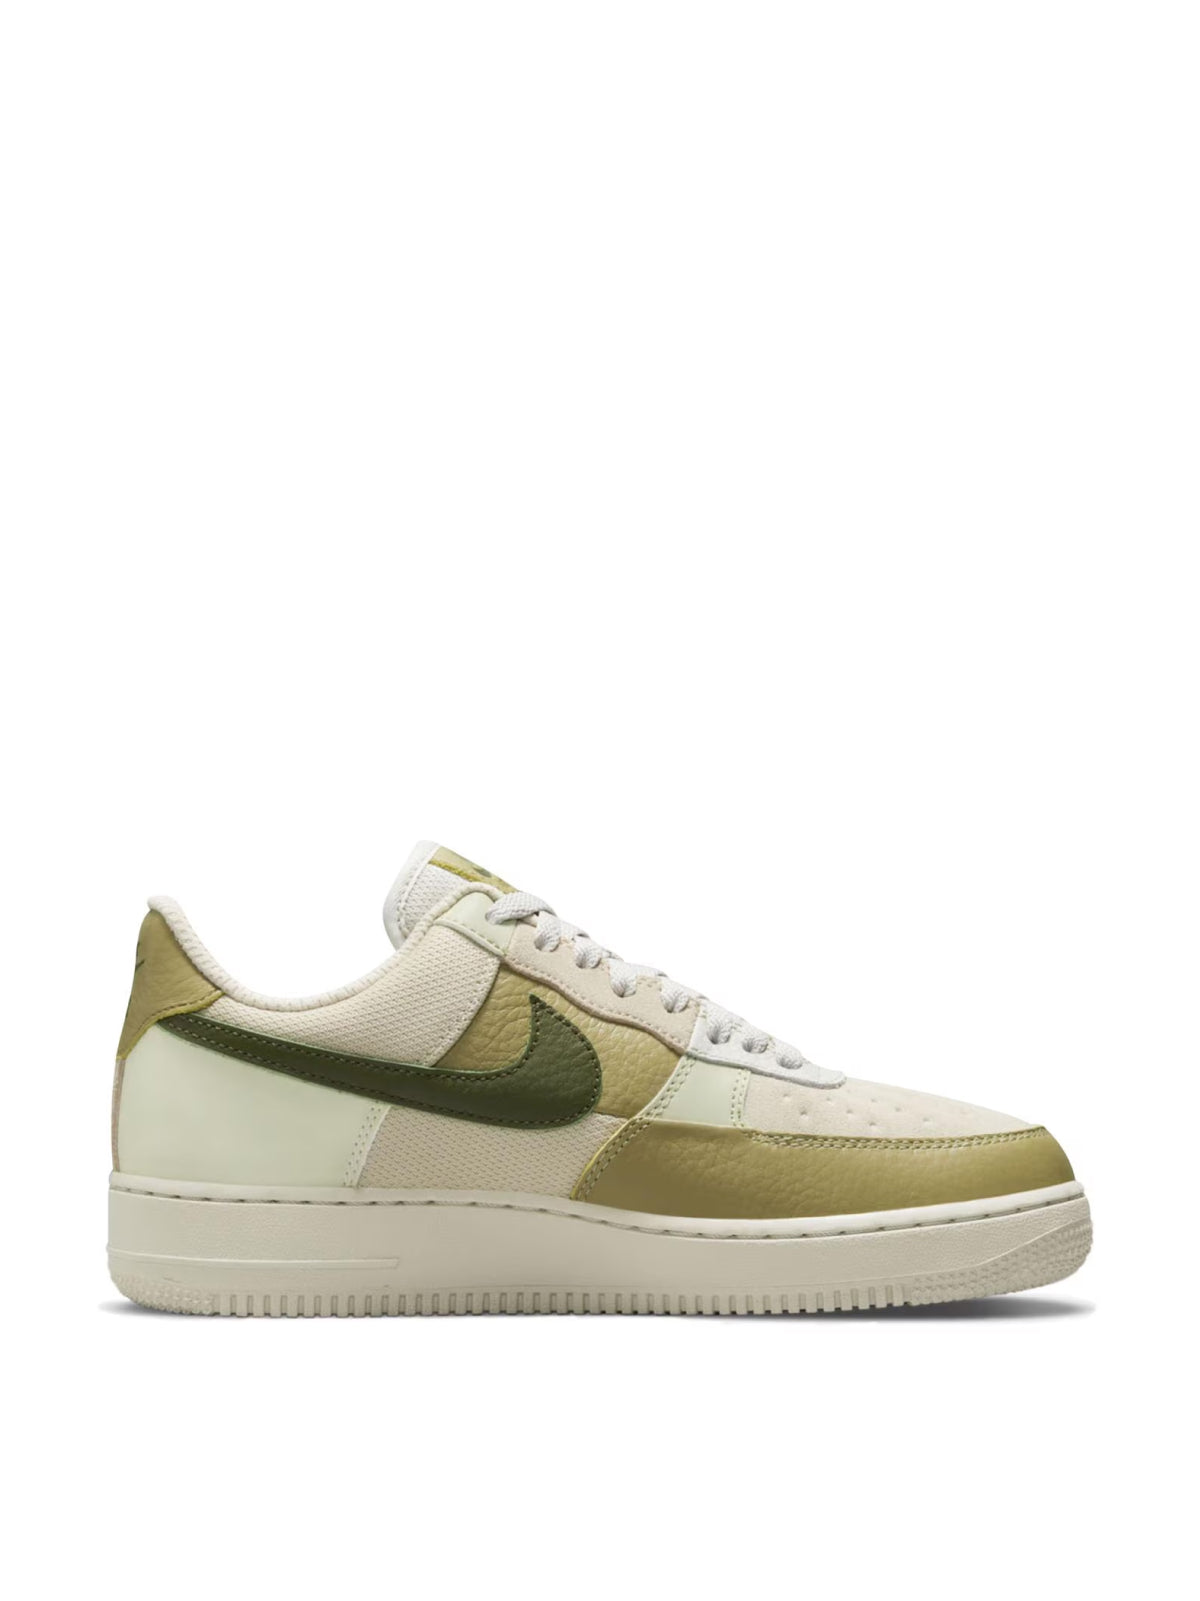 Air Force 1 'Rough Green' Sneakers